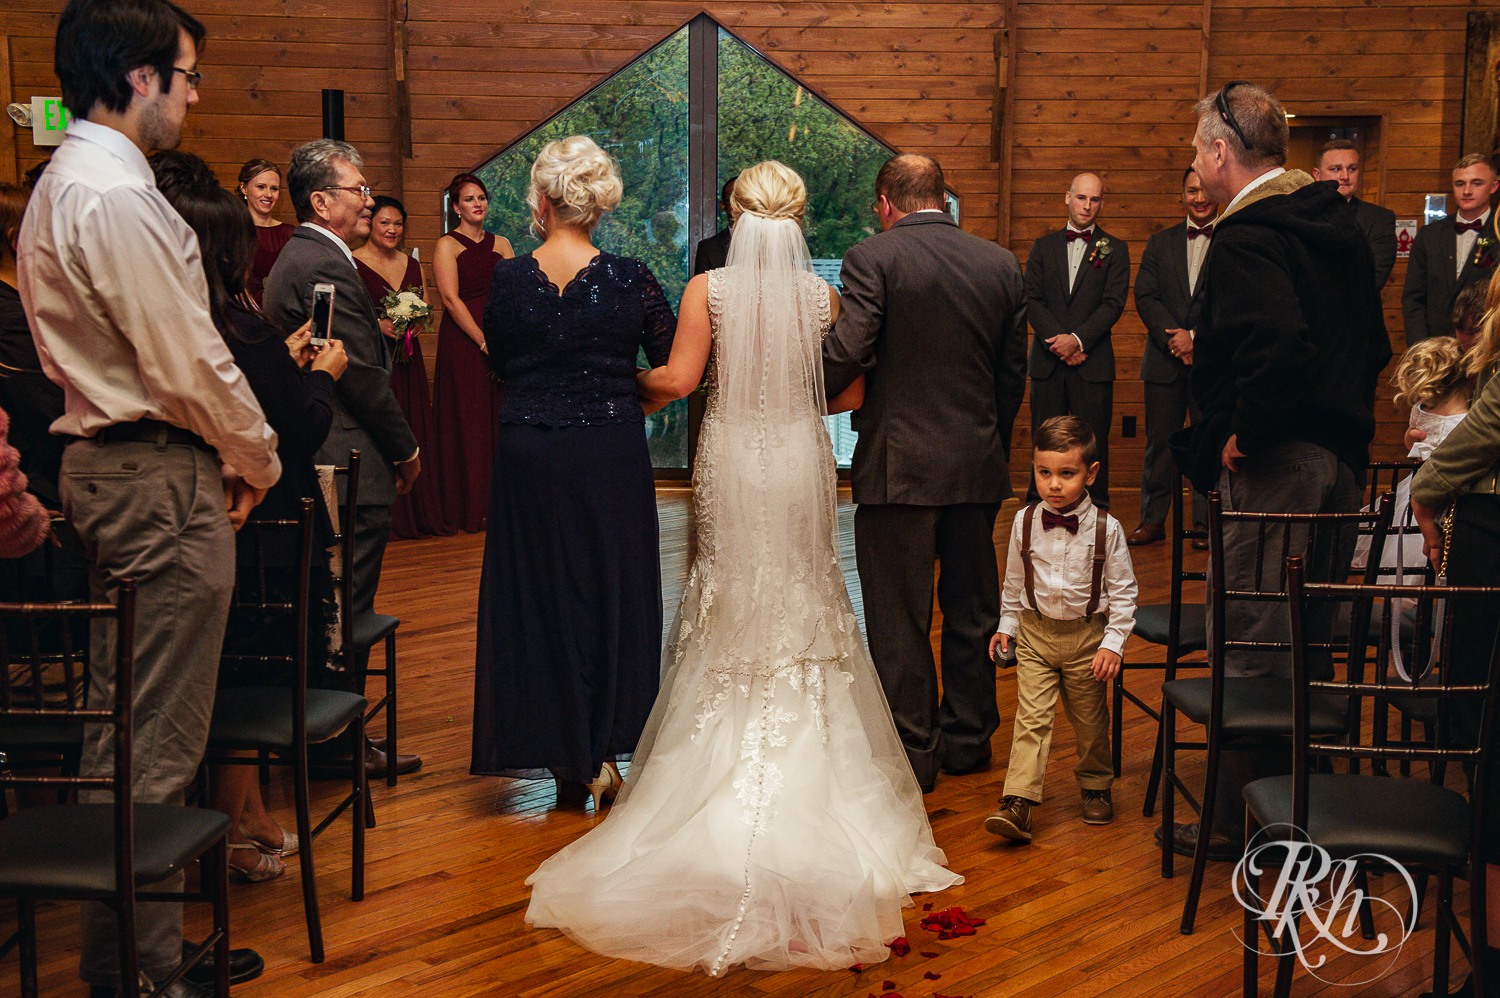 Bride walks down the aisle with parents at Green Acres Event Center barn wedding ceremony in Eden Prairie, Minnesota.